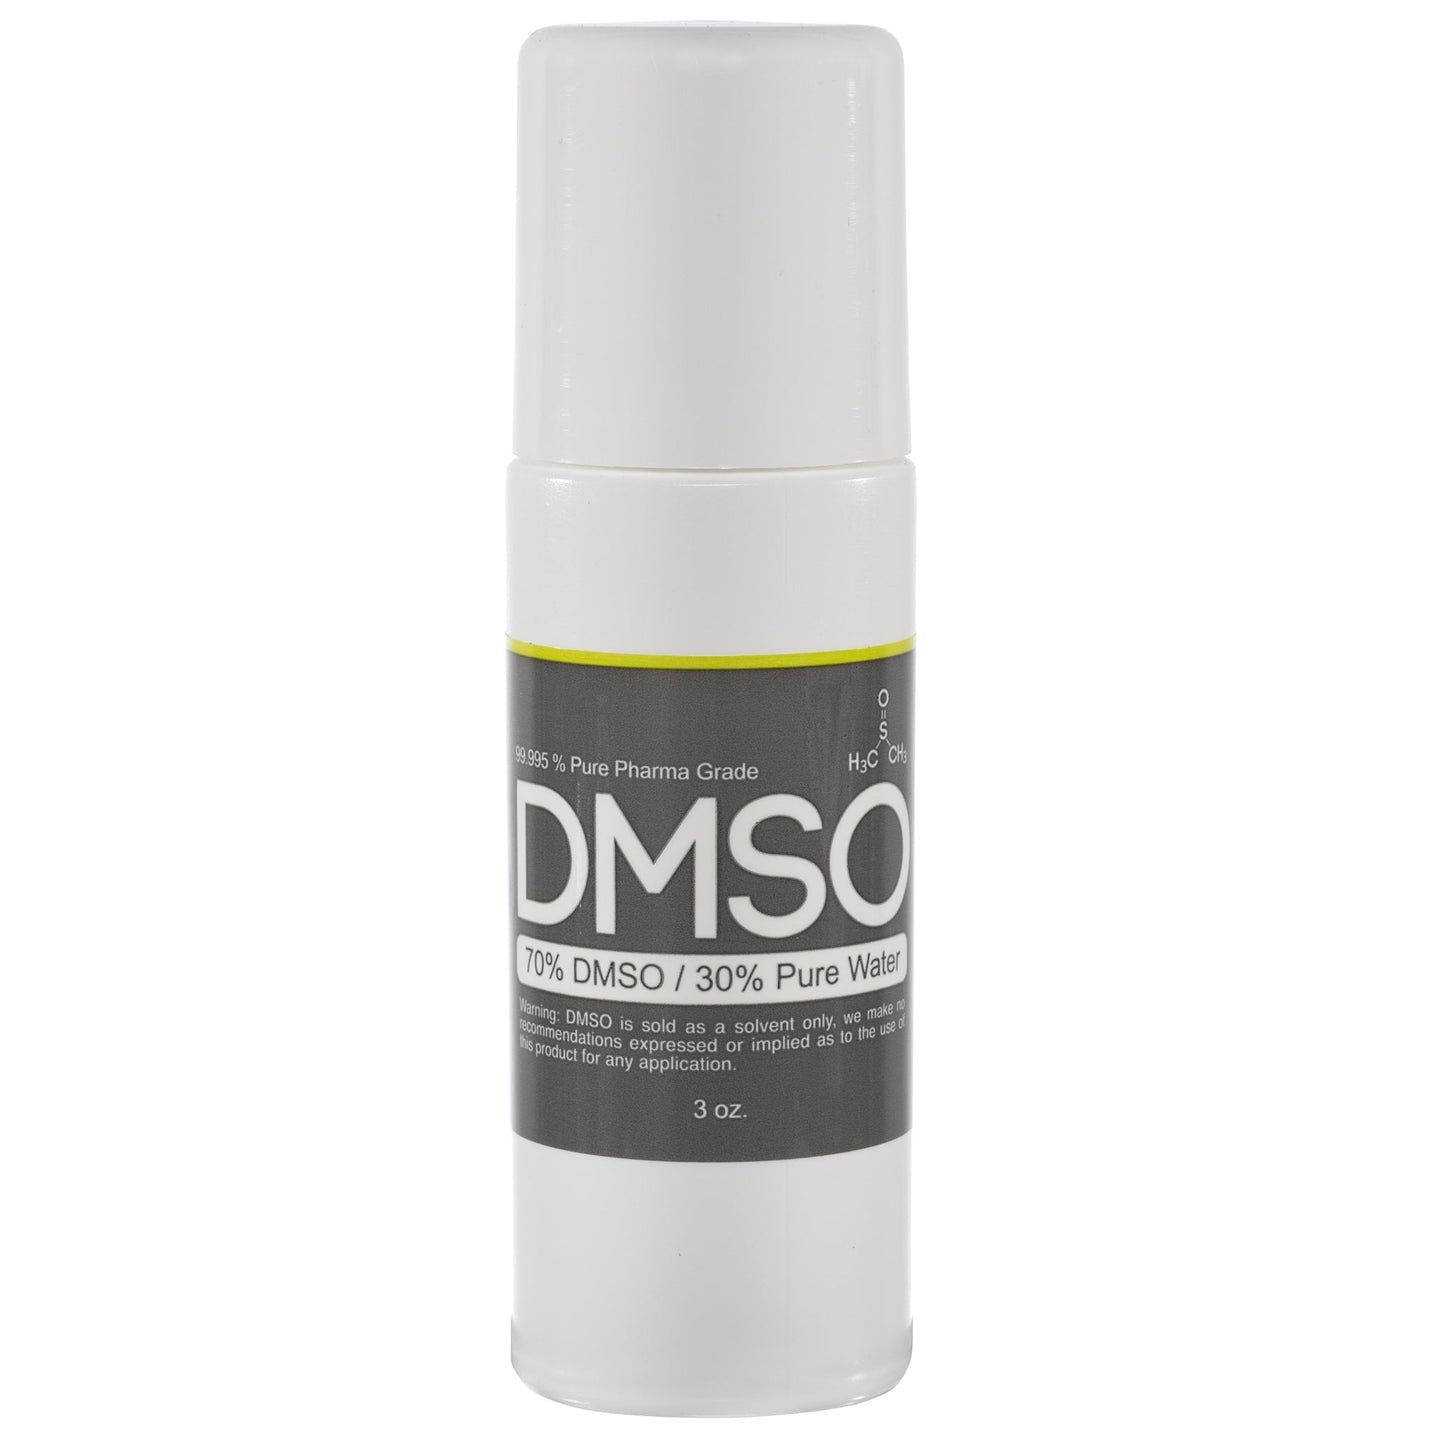 Potent odorless solvent DMSO 70% solution, versatile application in labs, industries and hobbies. 3oz bottle for easy storage and handling. Highly pure pharmaceutical grade dimethyl sulfoxide formulation with 30% deionized water - trusted for your needs. Buy now from a reputable supplier to experience the power of this remarkable universal solvent. One Bottle.